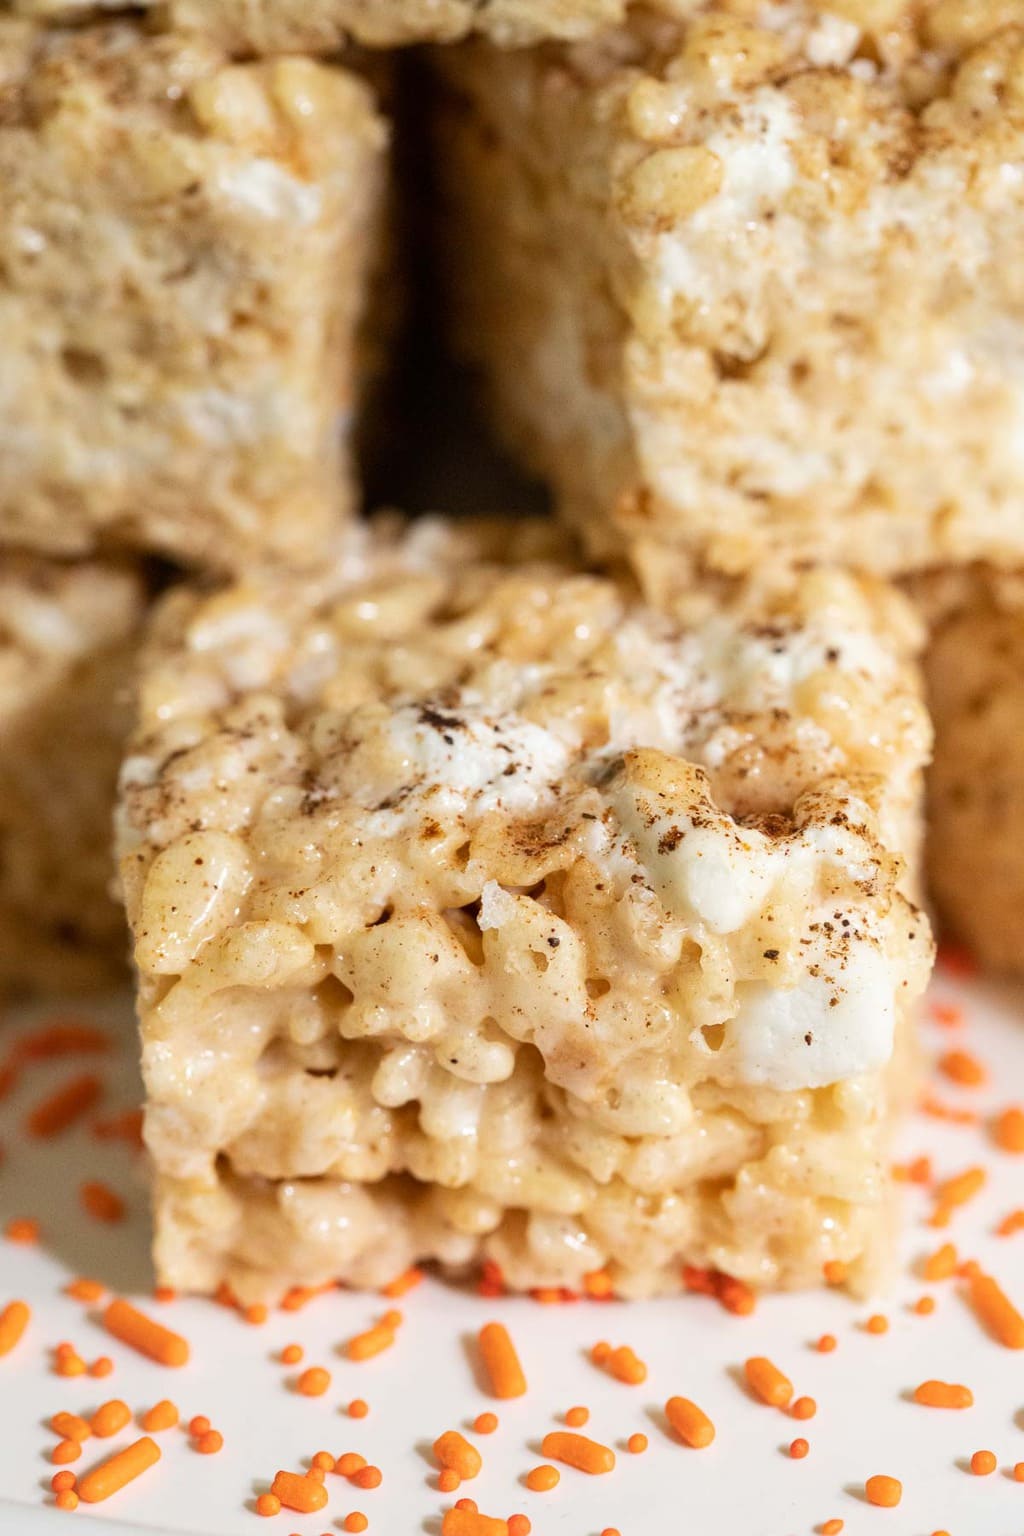 Extreme closeup vertical photo of a stack of Pumpkin Spiced Brown Butter Rice Krispie Treats.